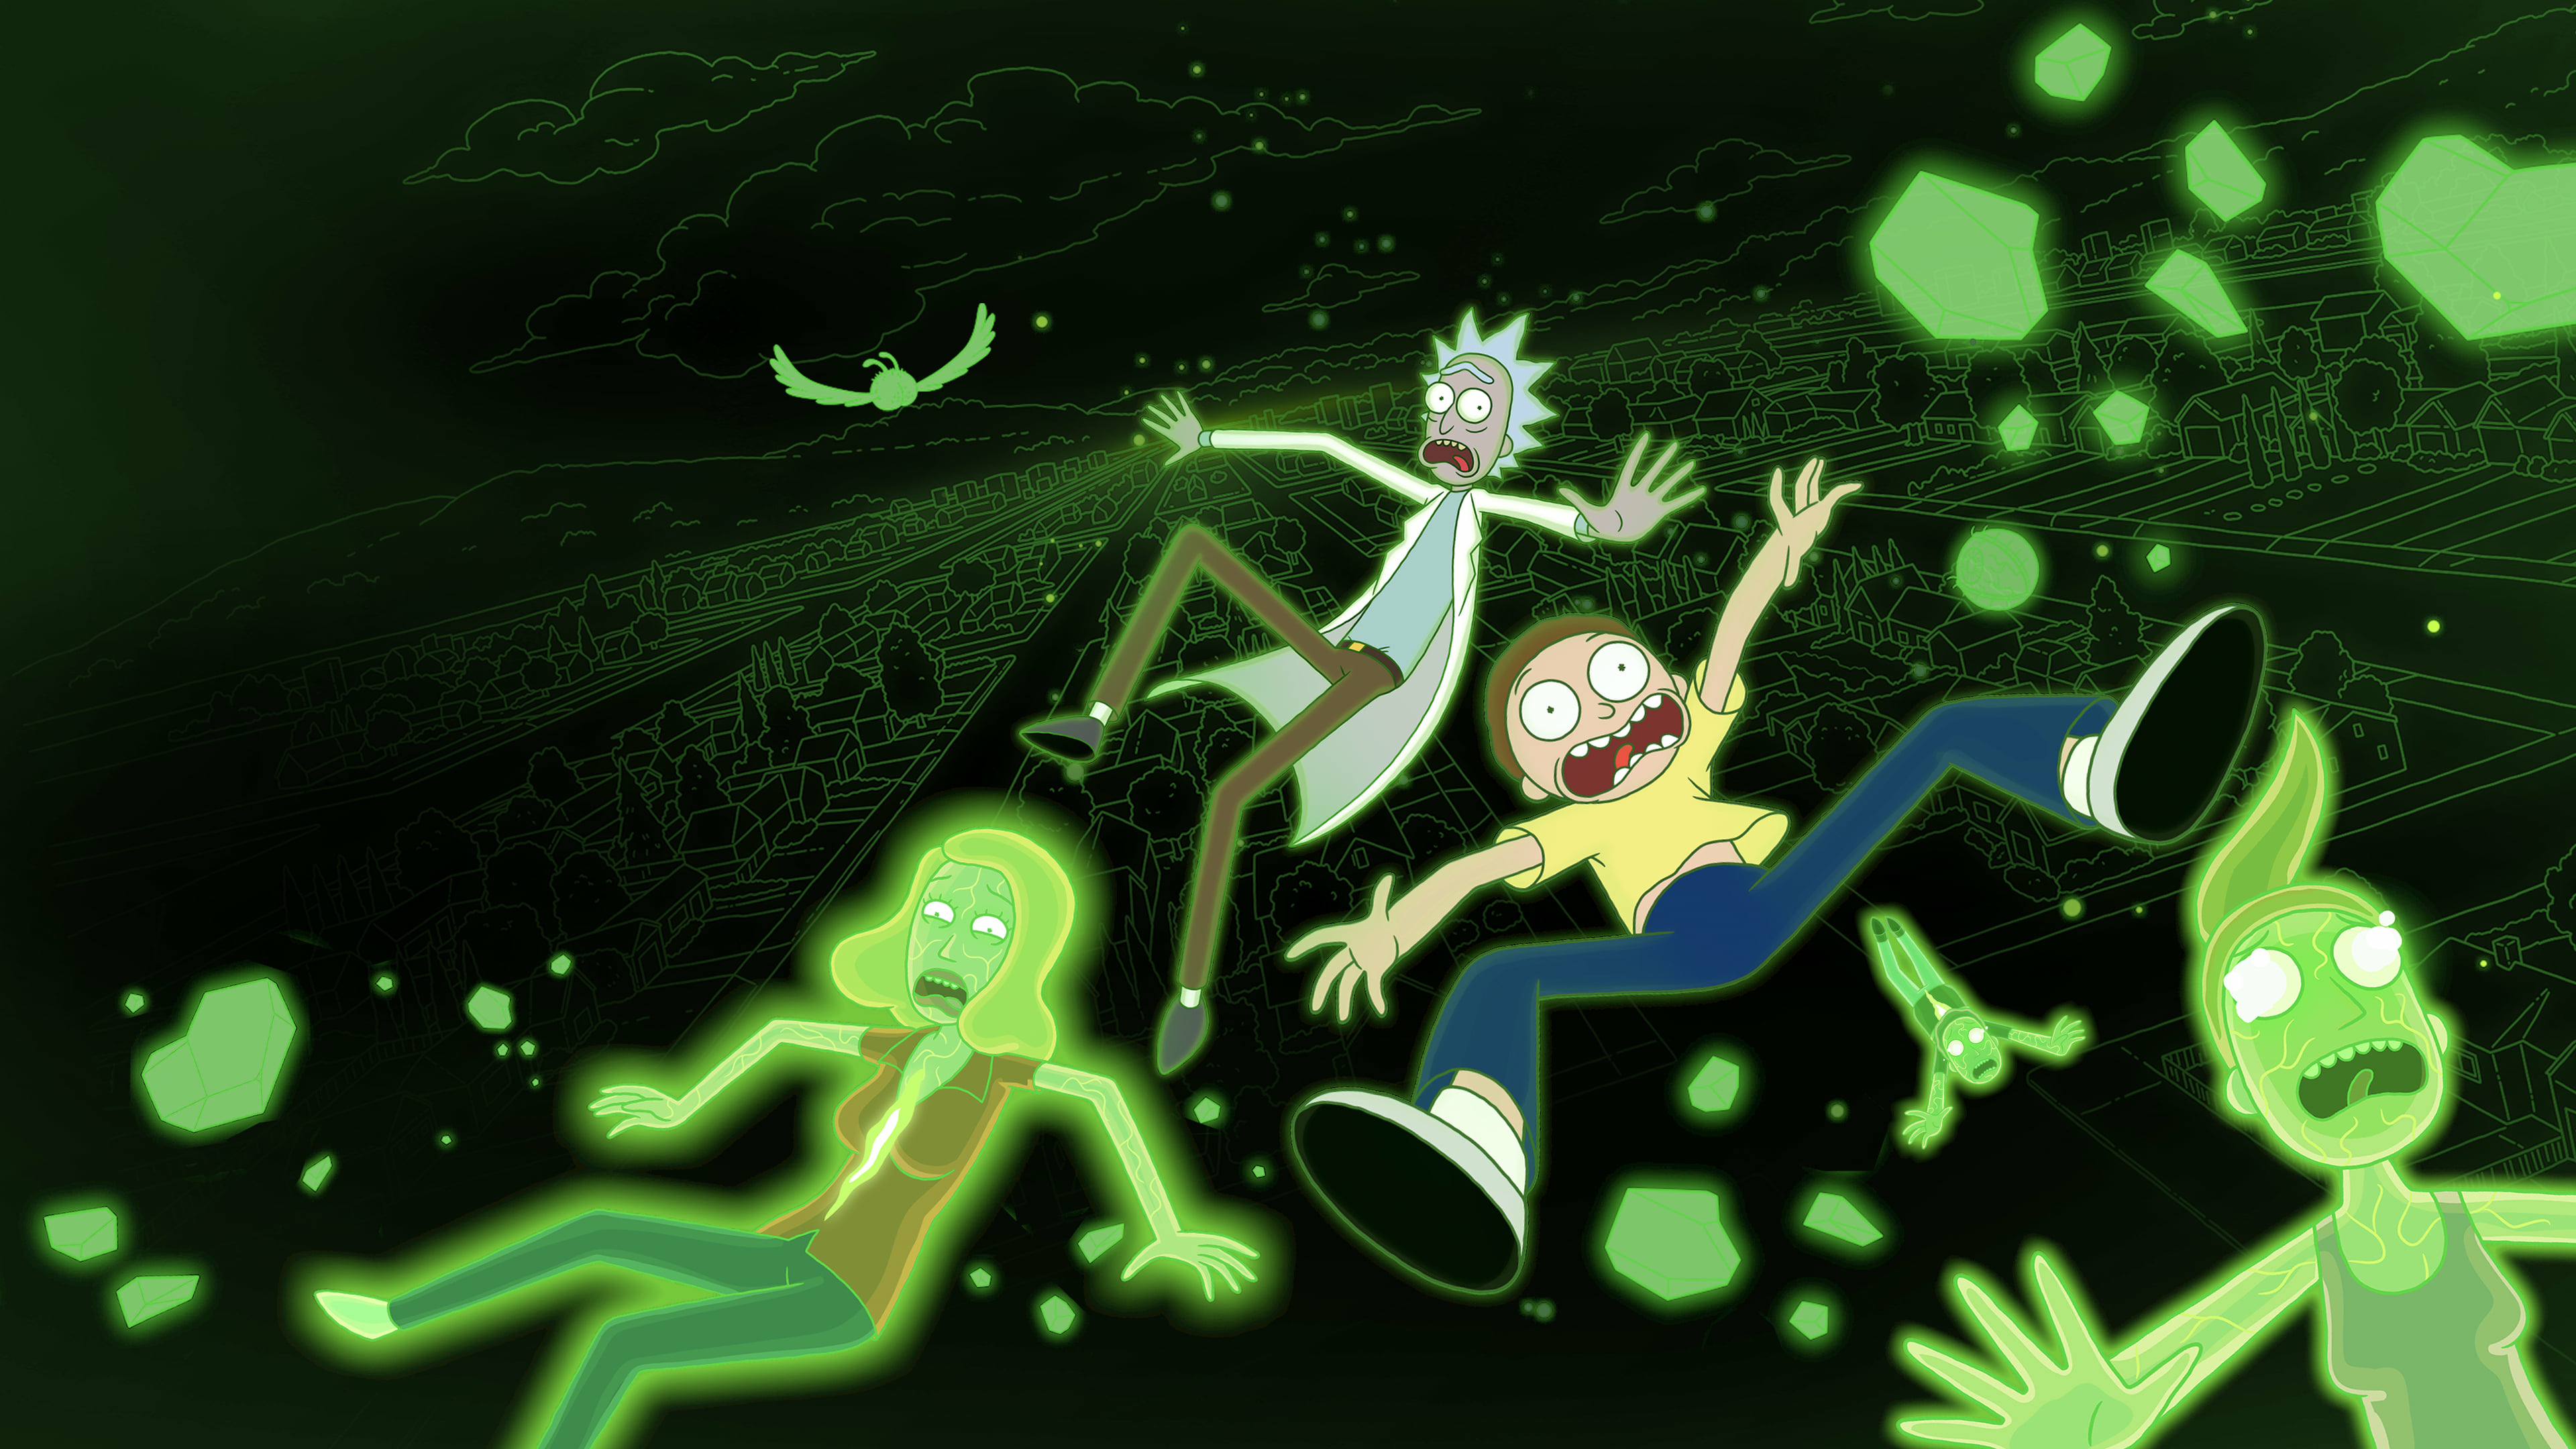 Rick and Morty Season 6 Wallpaper, HD TV Series 4K Wallpapers, Images,  Photos and Background - Wallpapers Den